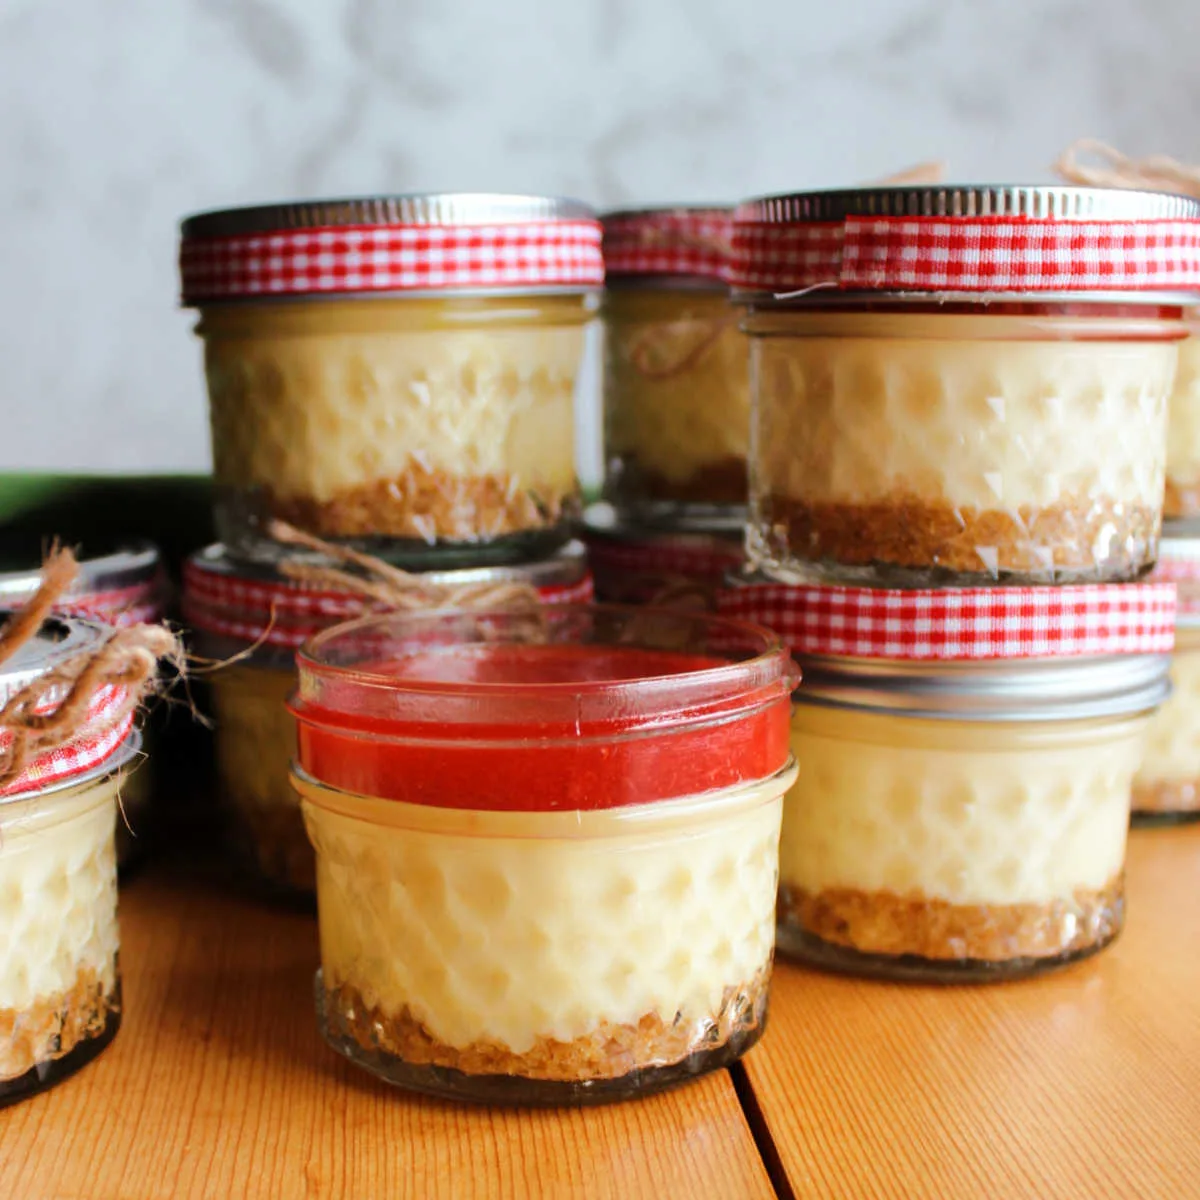 jars of cheesecake with graham cracker crust and strawberry topping